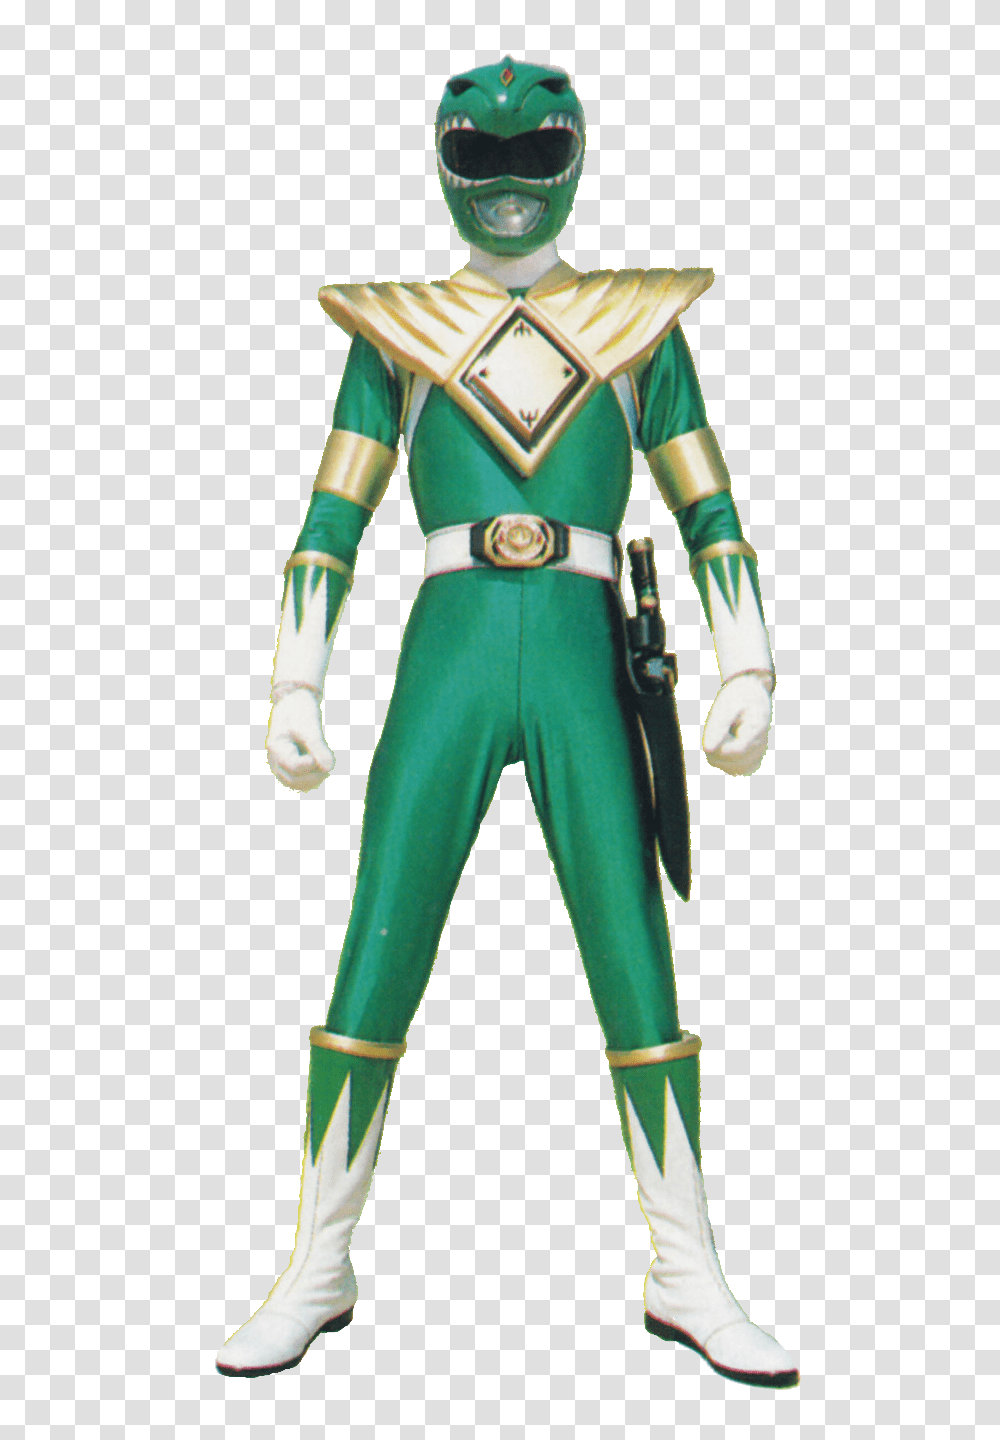 2 Power Rangers Free Image, Character, Costume, Apparel Transparent Png